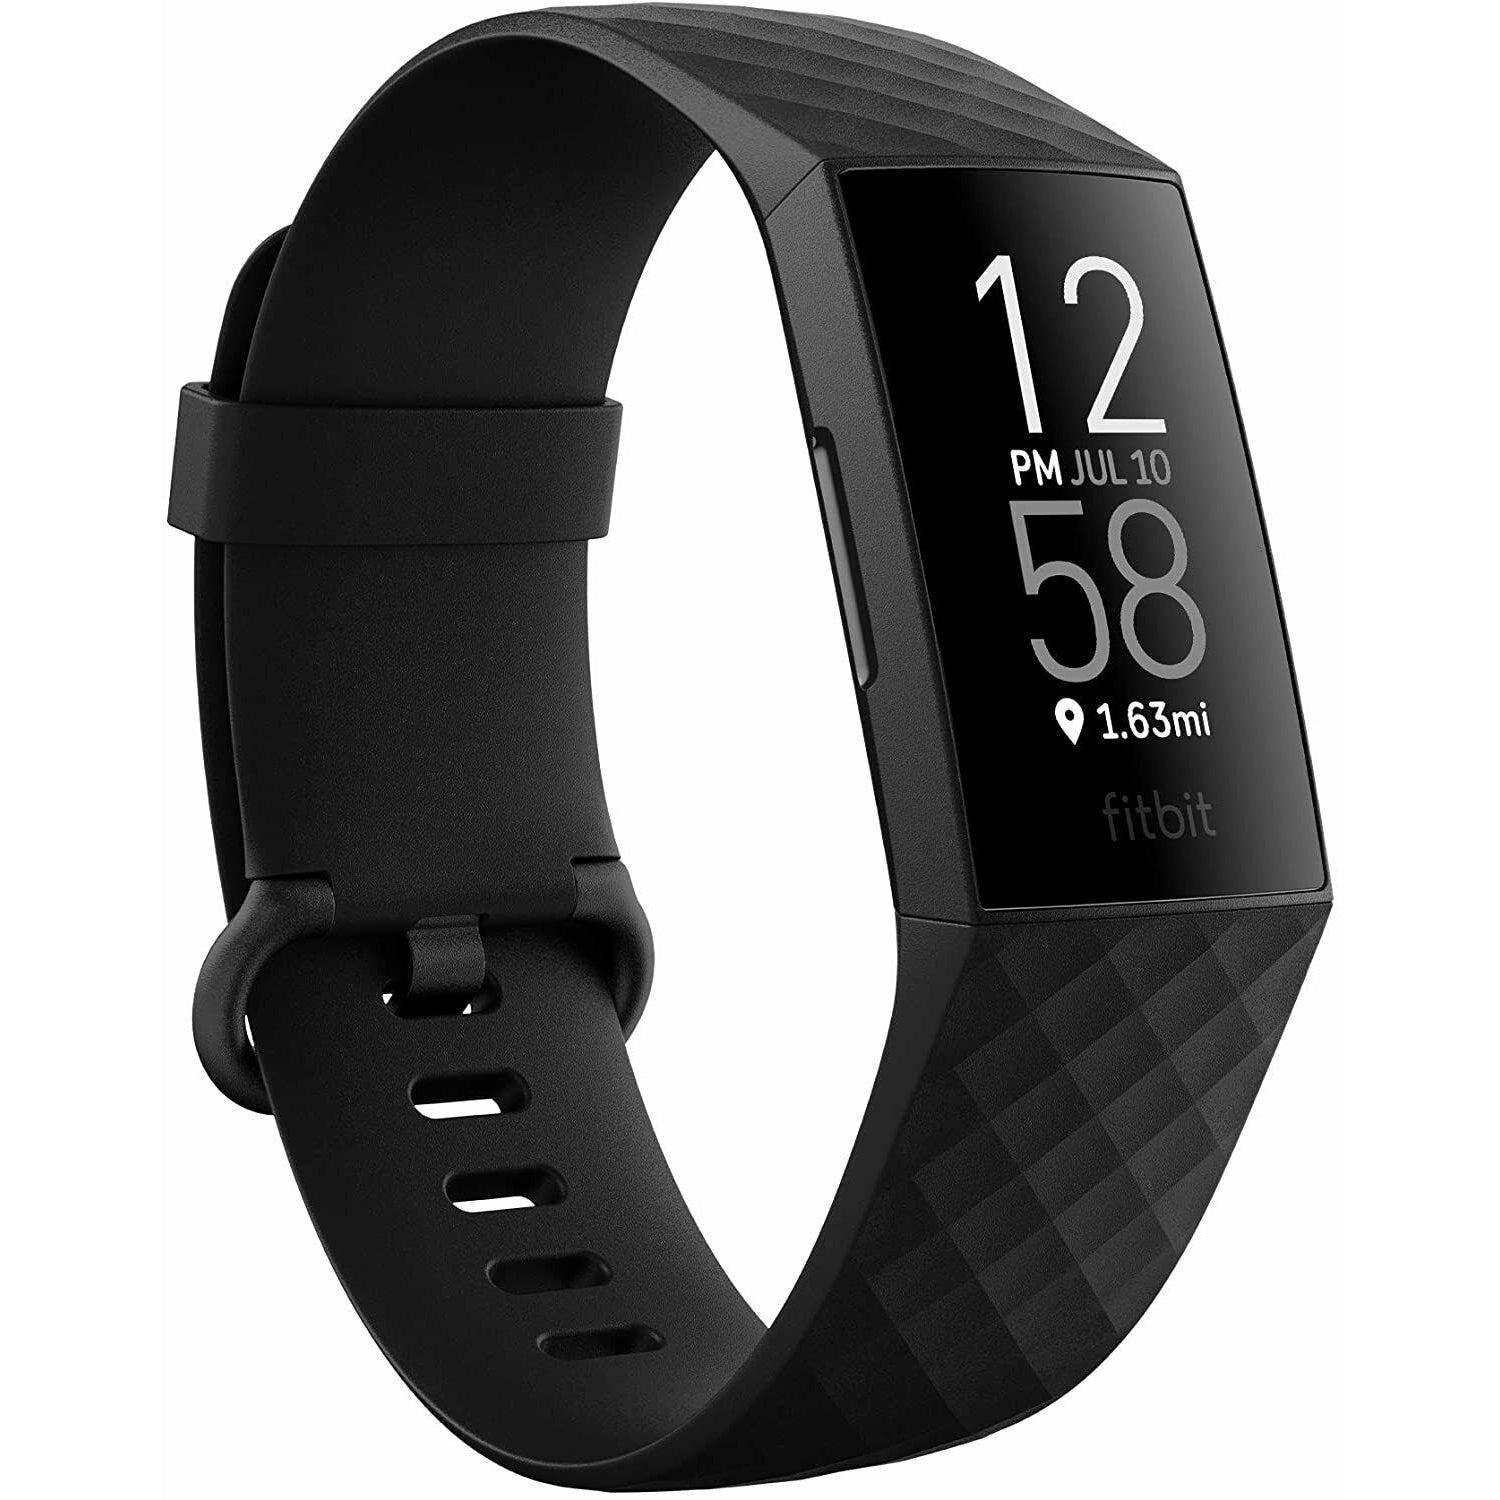 Fitbit Charge 4 Advanced Fitness Tracker with GPS - Black - Refurbished Pristine